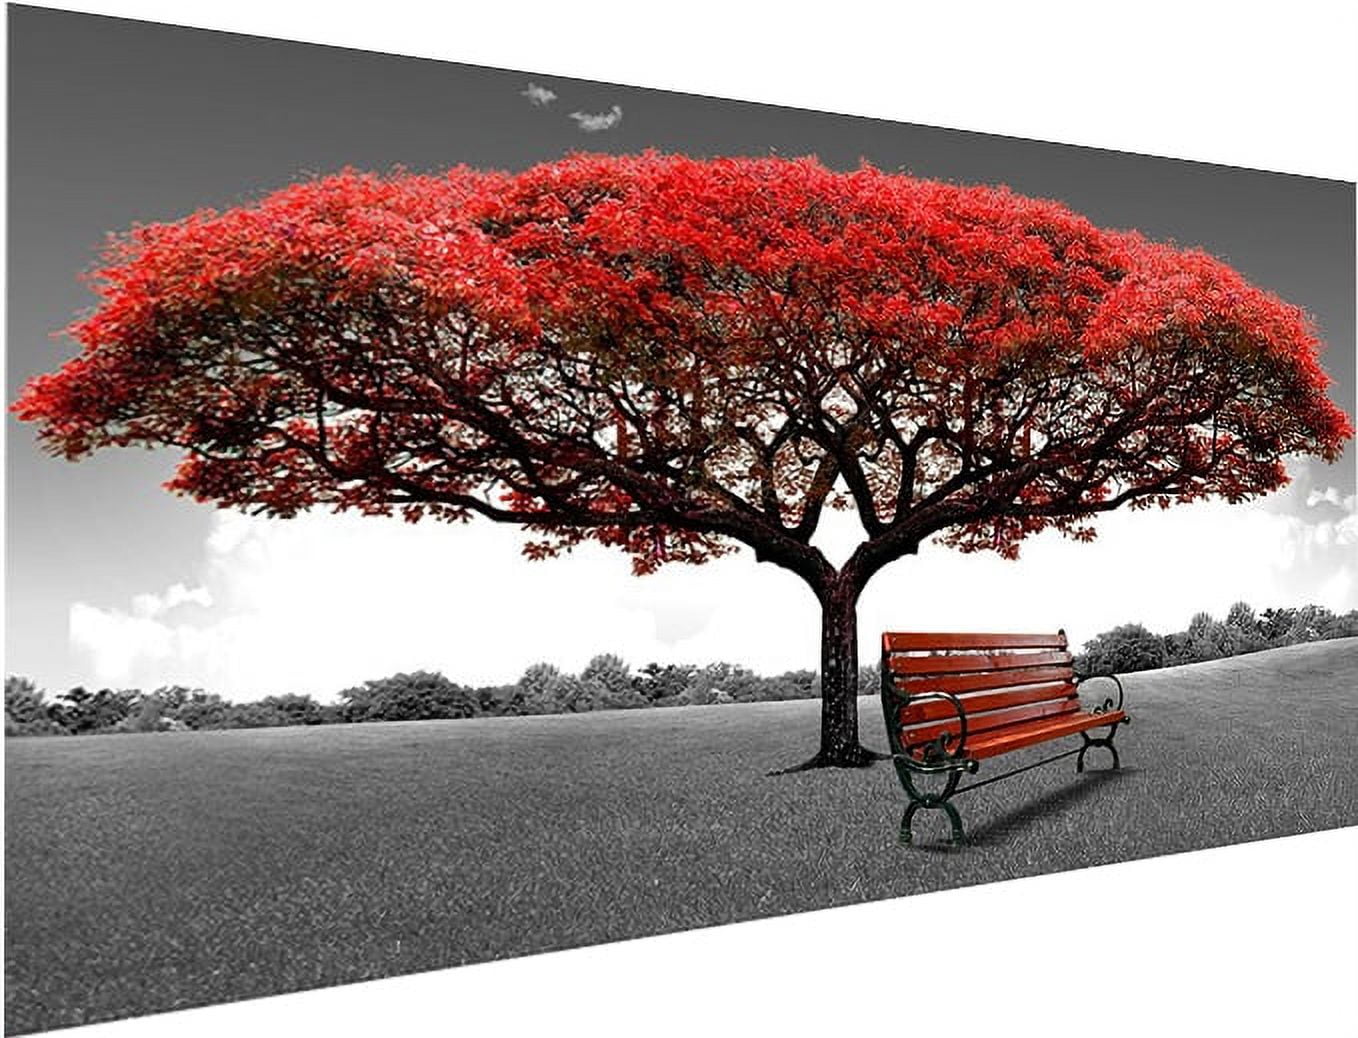 YALKIN Red Tree Desk Large Diamond Painting Kits for Adults (27.6 x 15.7  inch), 5D Diamond Art Full Round Drill DIY Embroidery Pictures Arts Cross Stitch  Kits for Home Wall Decor 